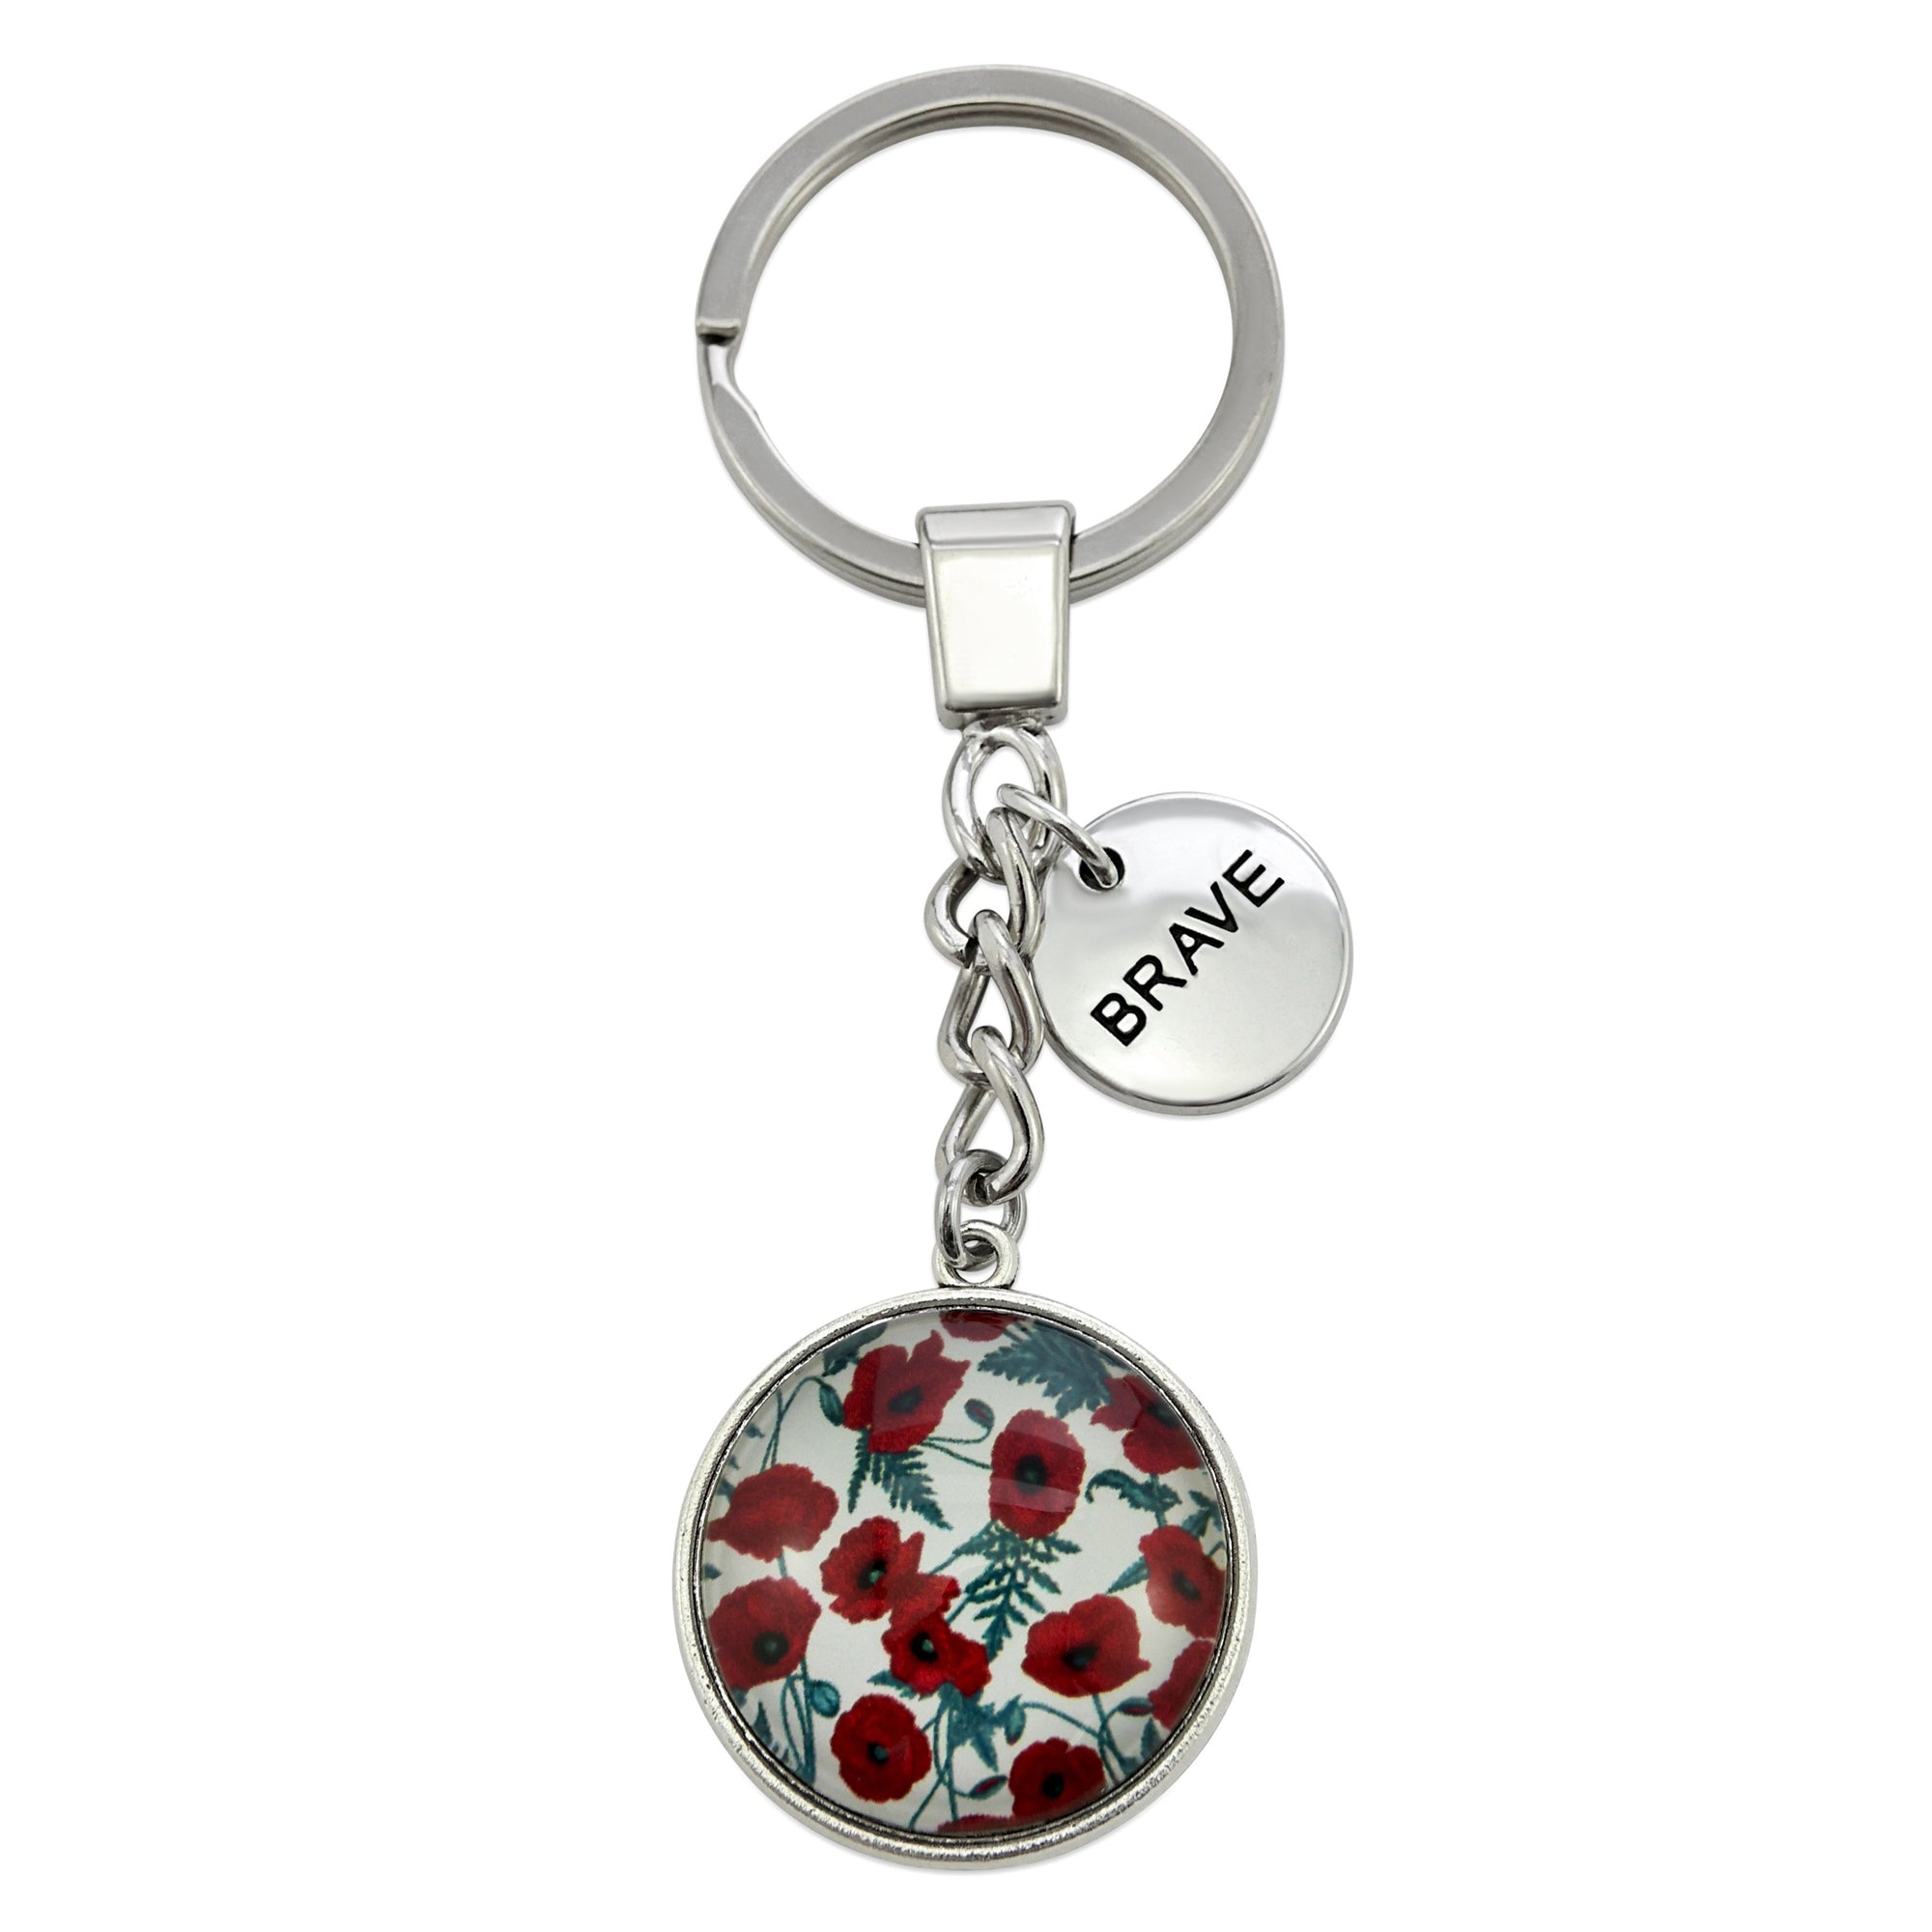 POPPIES Collection - Vintage Silver 'BRAVE' Keyring - Red Poppies (10523)